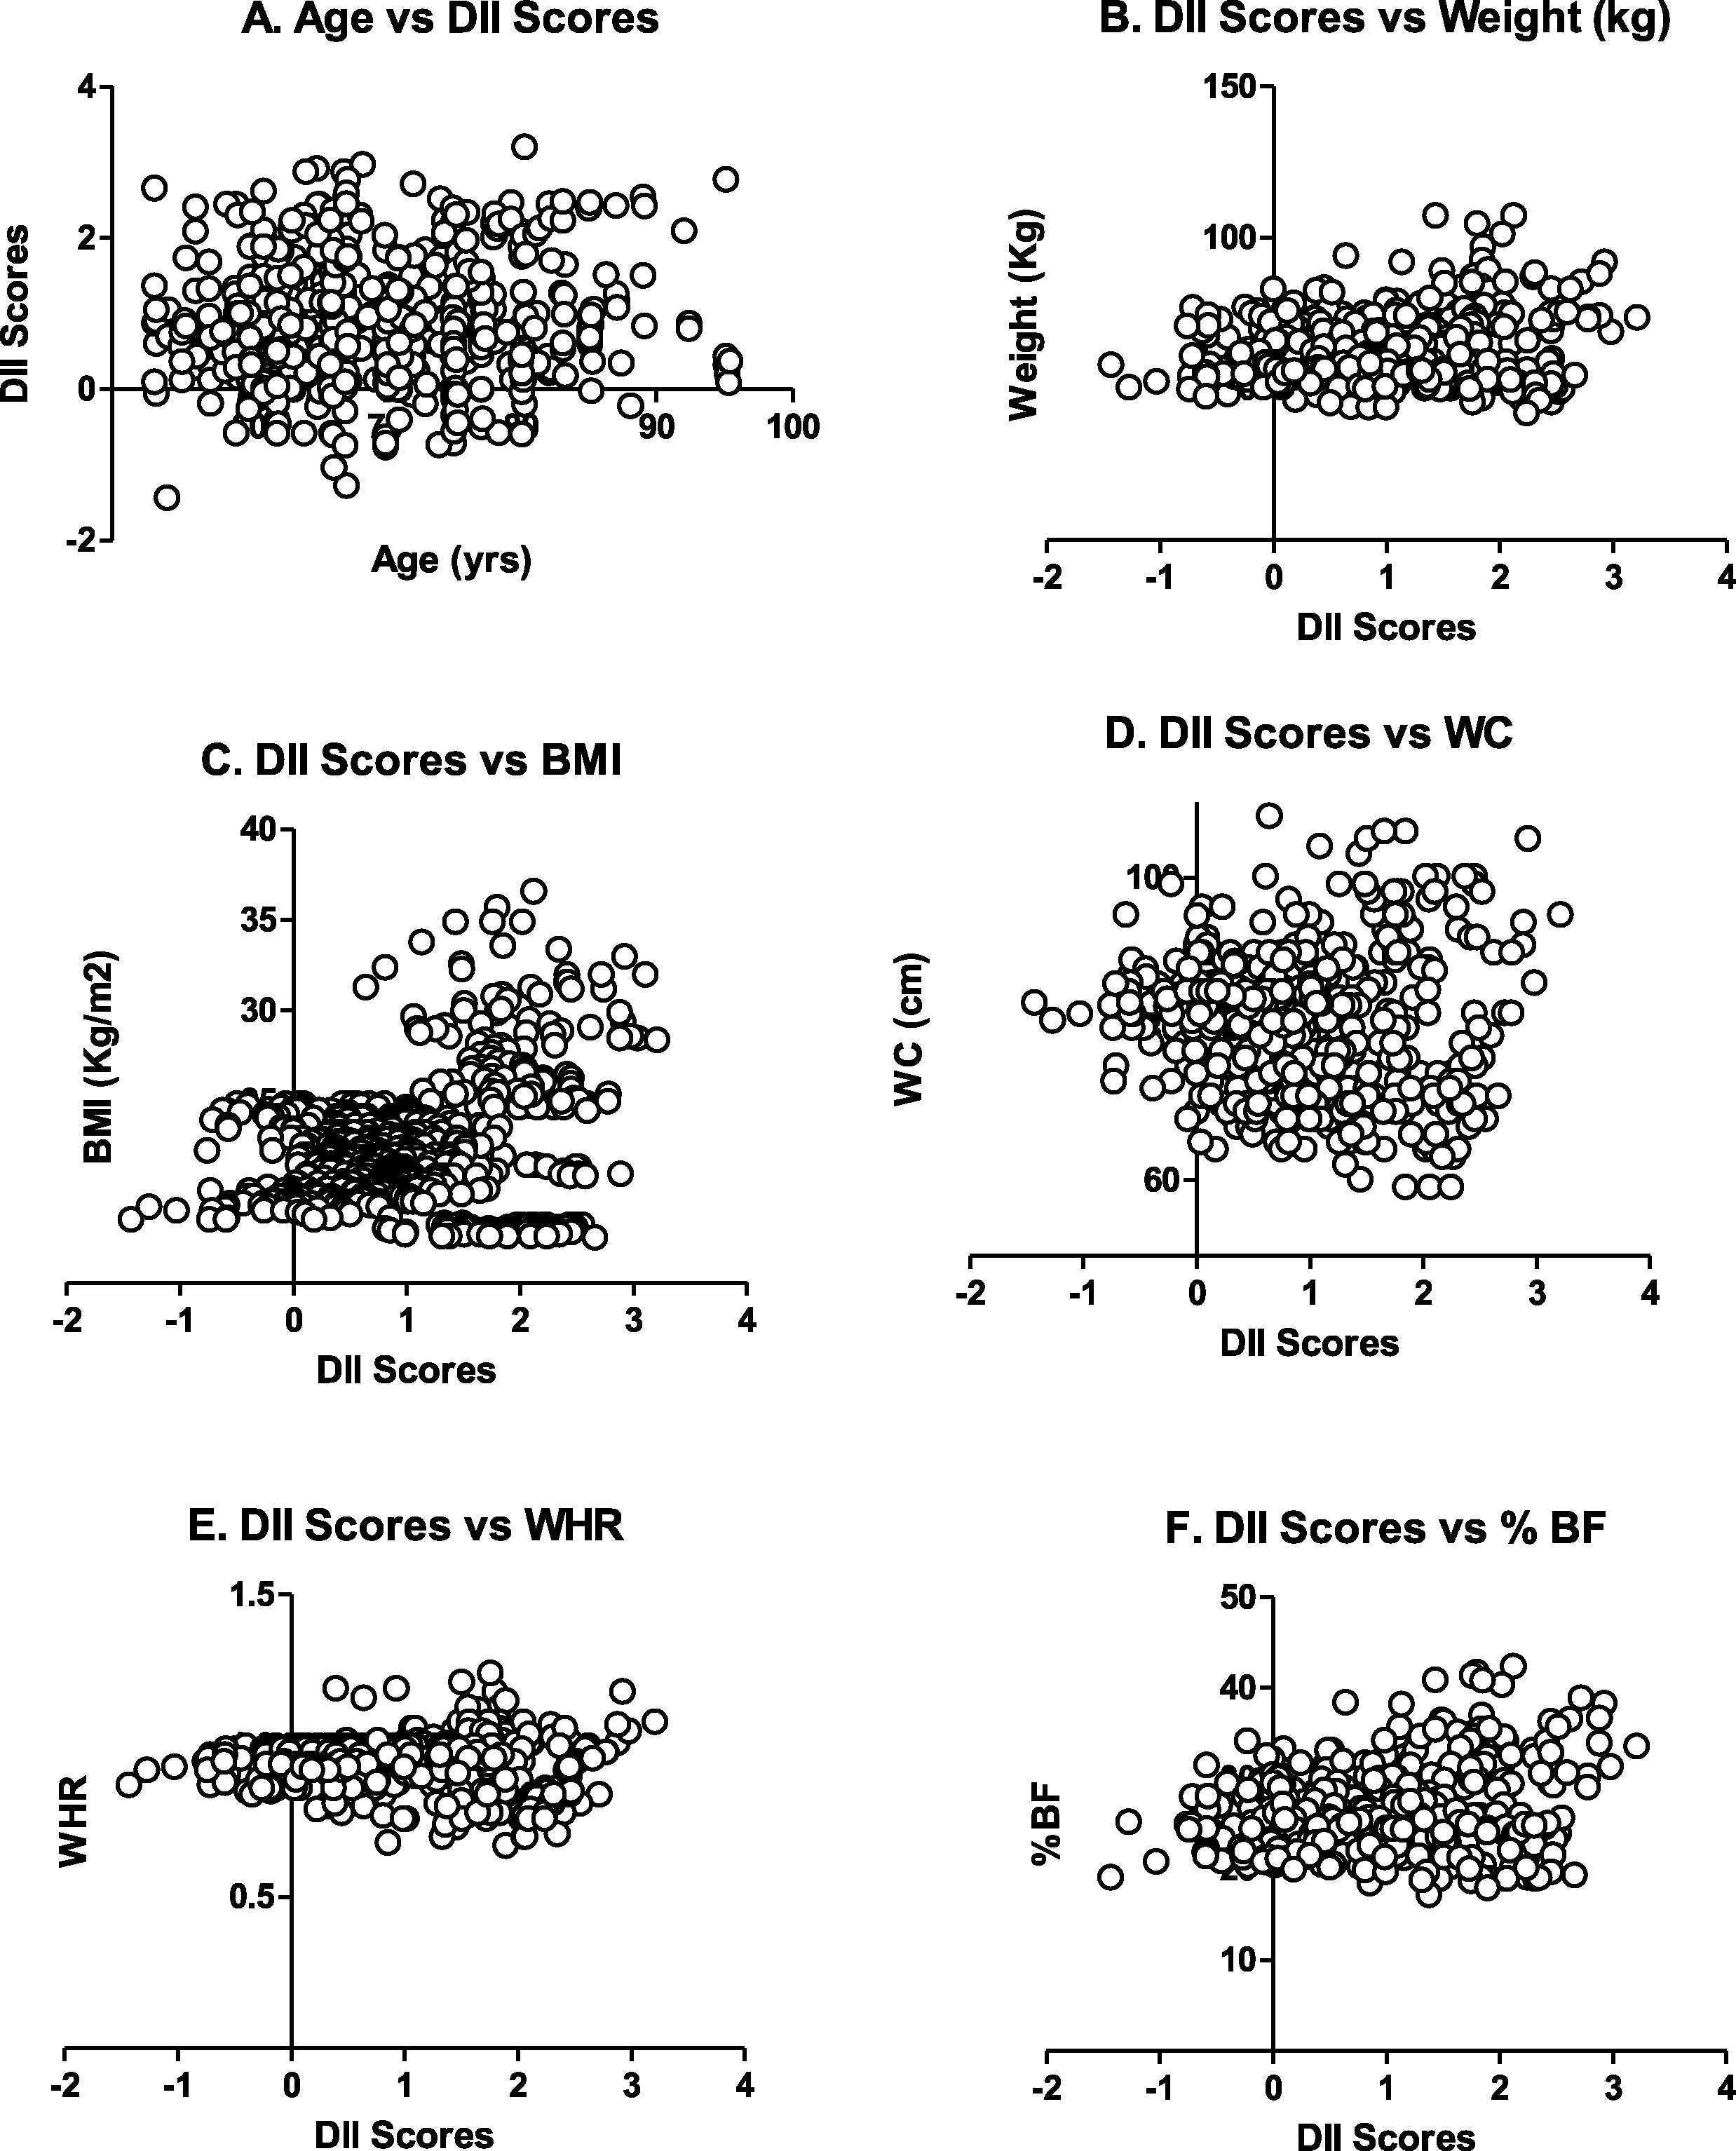 Scatterplot for DII score Vs Age (A), Weight (B), BMI (C), WC (D), WHR €, and % BF (F).